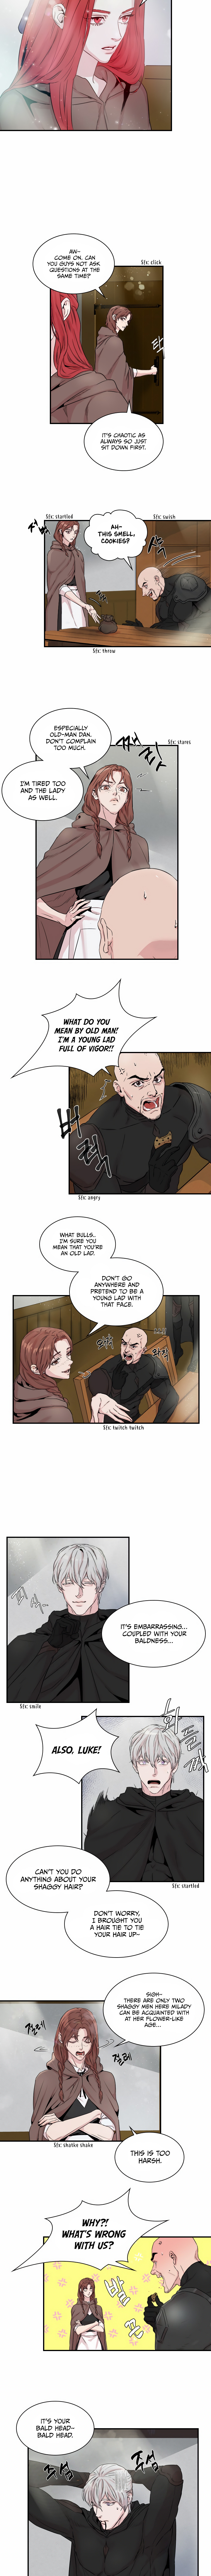 Aideen - Page 3